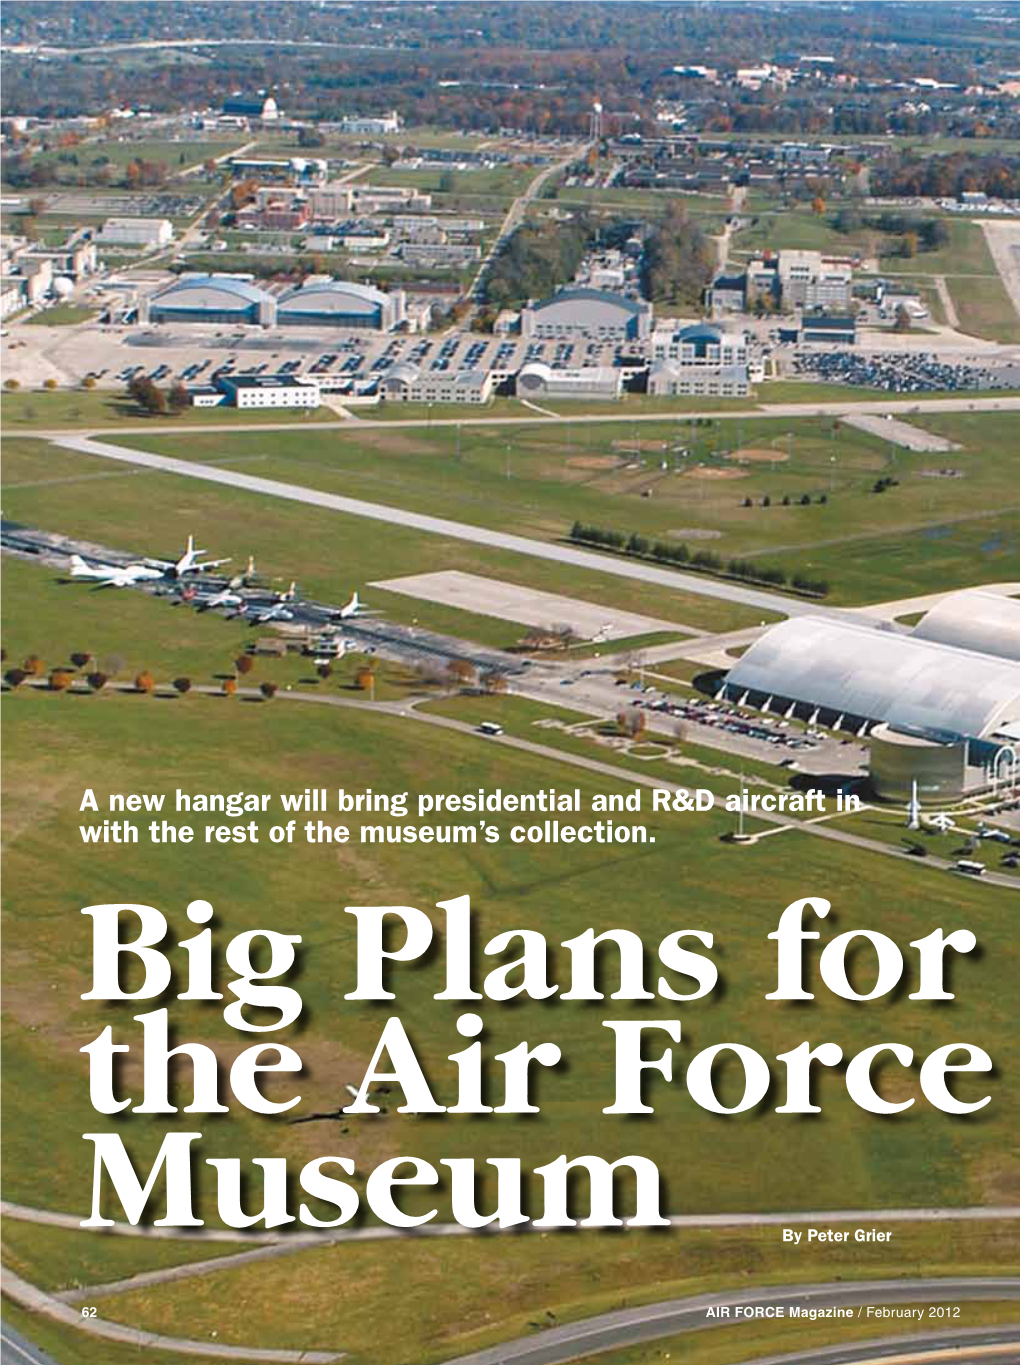 A New Hangar Will Bring Presidential and R&D